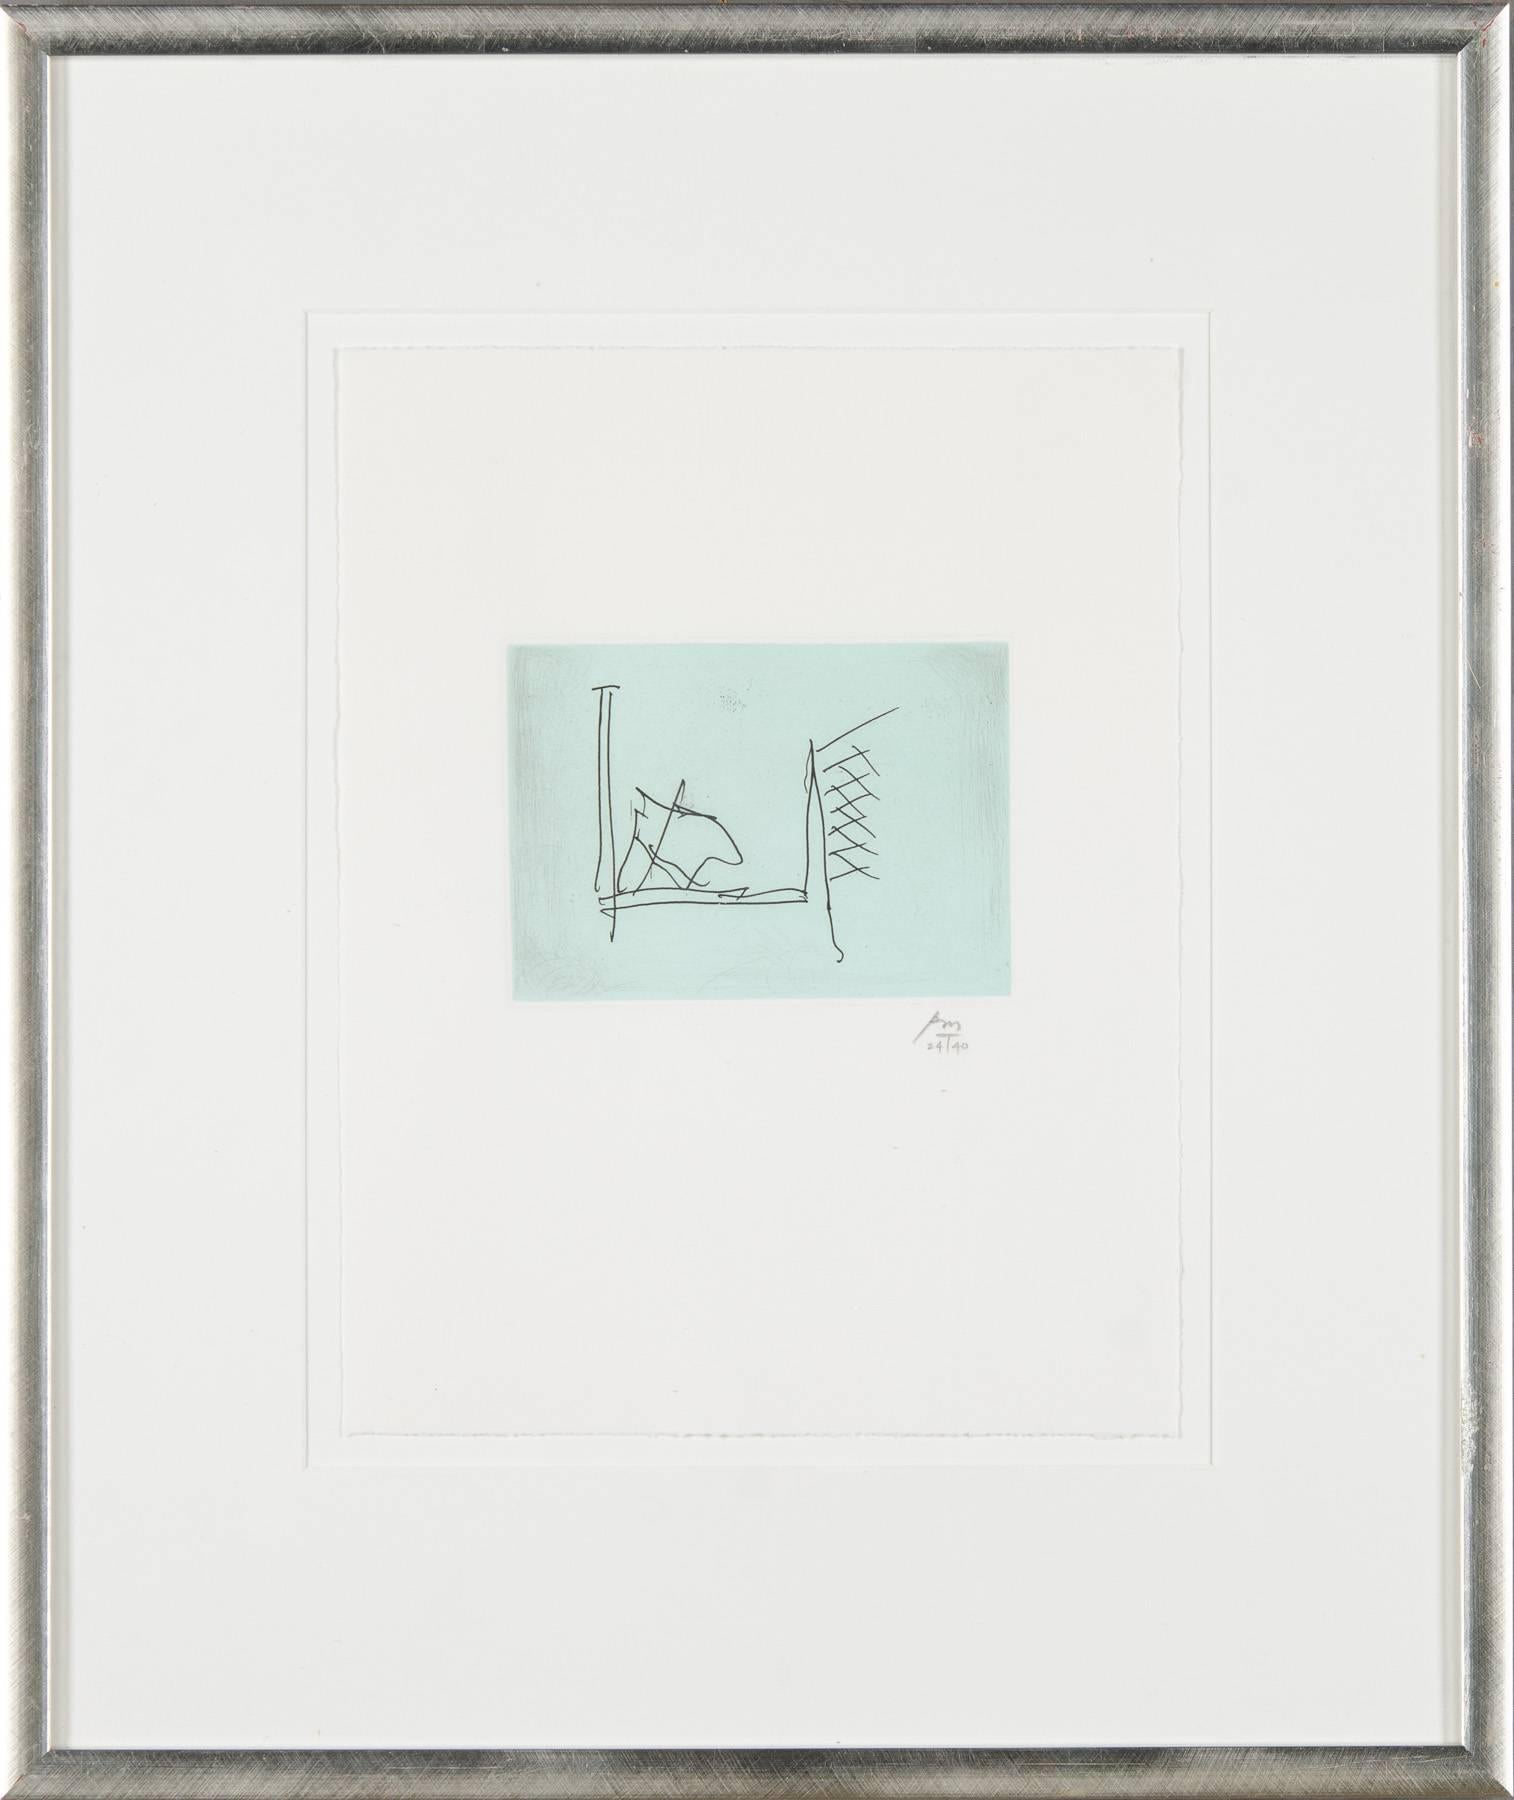 The Hospital - Print by Robert Motherwell